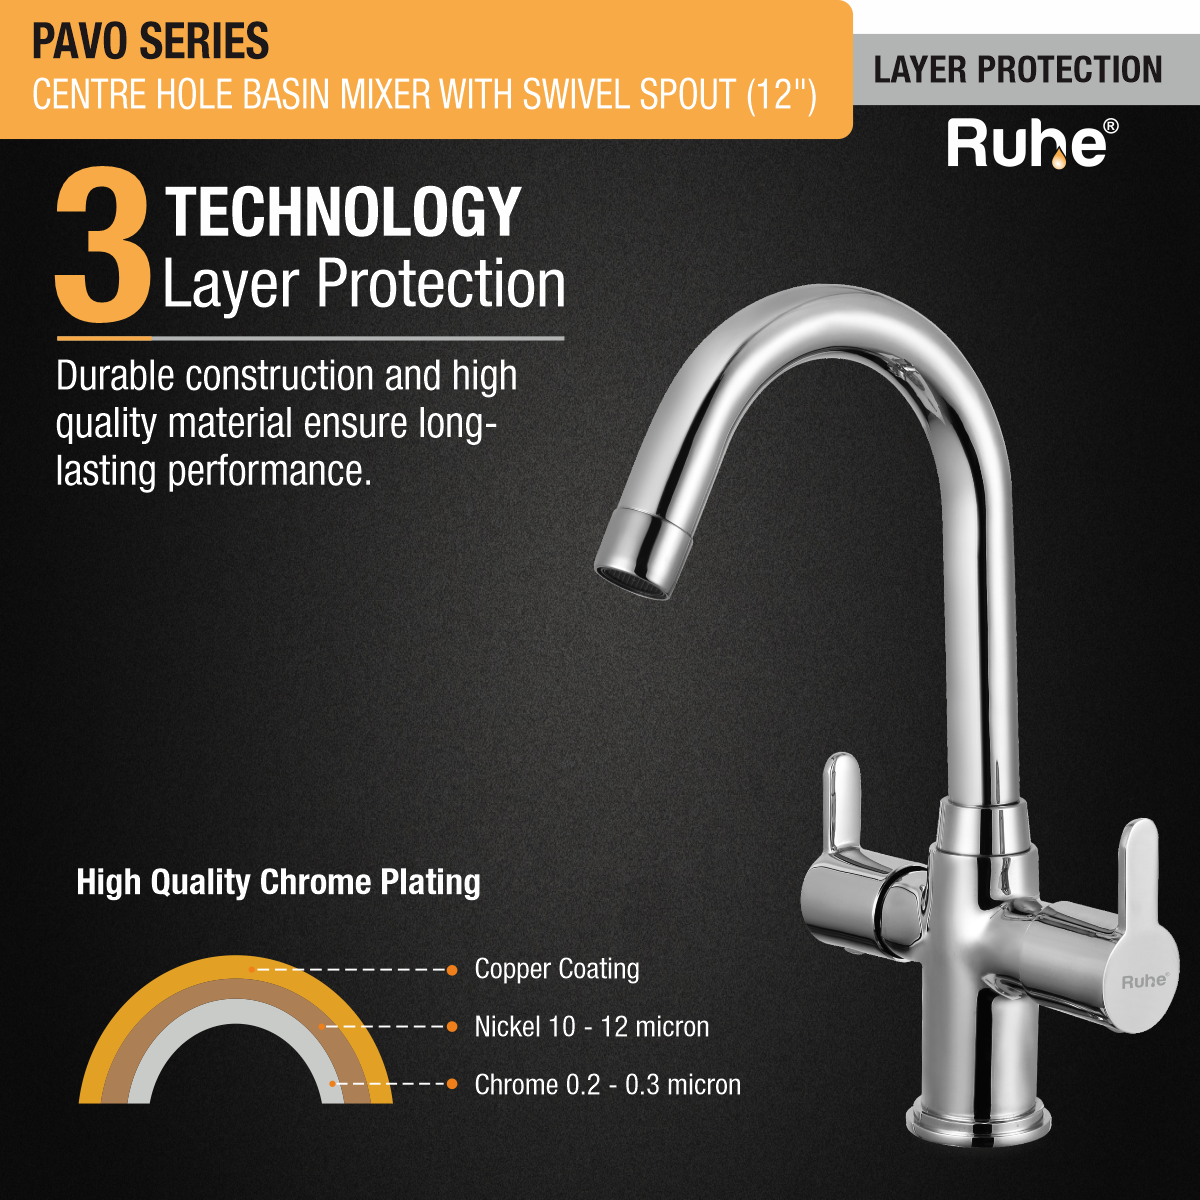 Pavo Centre Hole Basin Mixer with Small (12 inches) Round Swivel Spout Faucet 3 layer protection